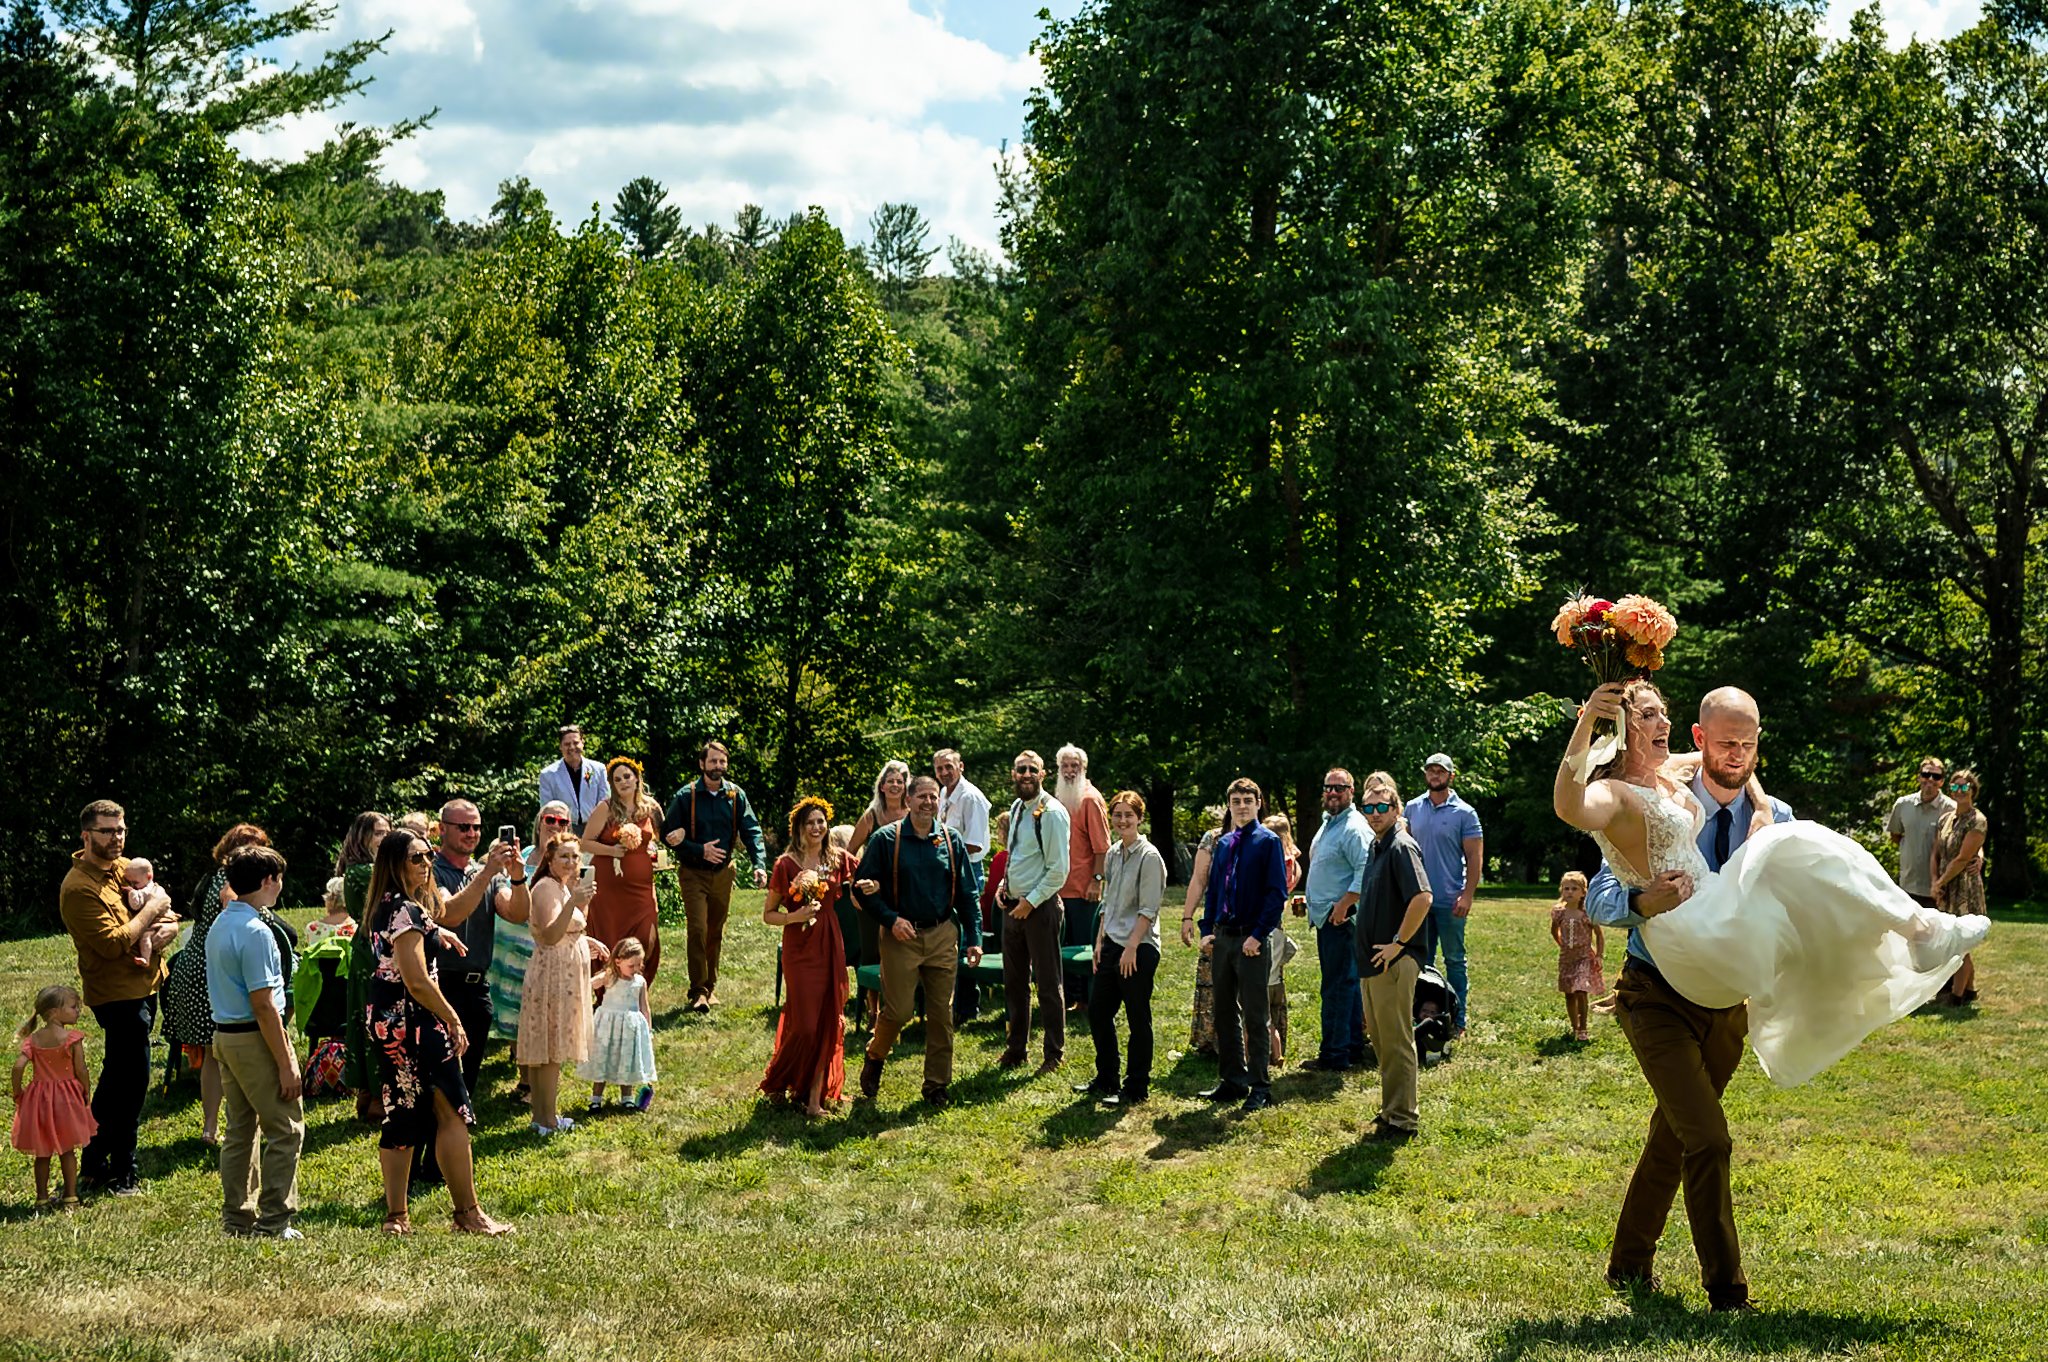 A wedding photography portfolio capturing a bride and groom in the air during a woodland celebration.